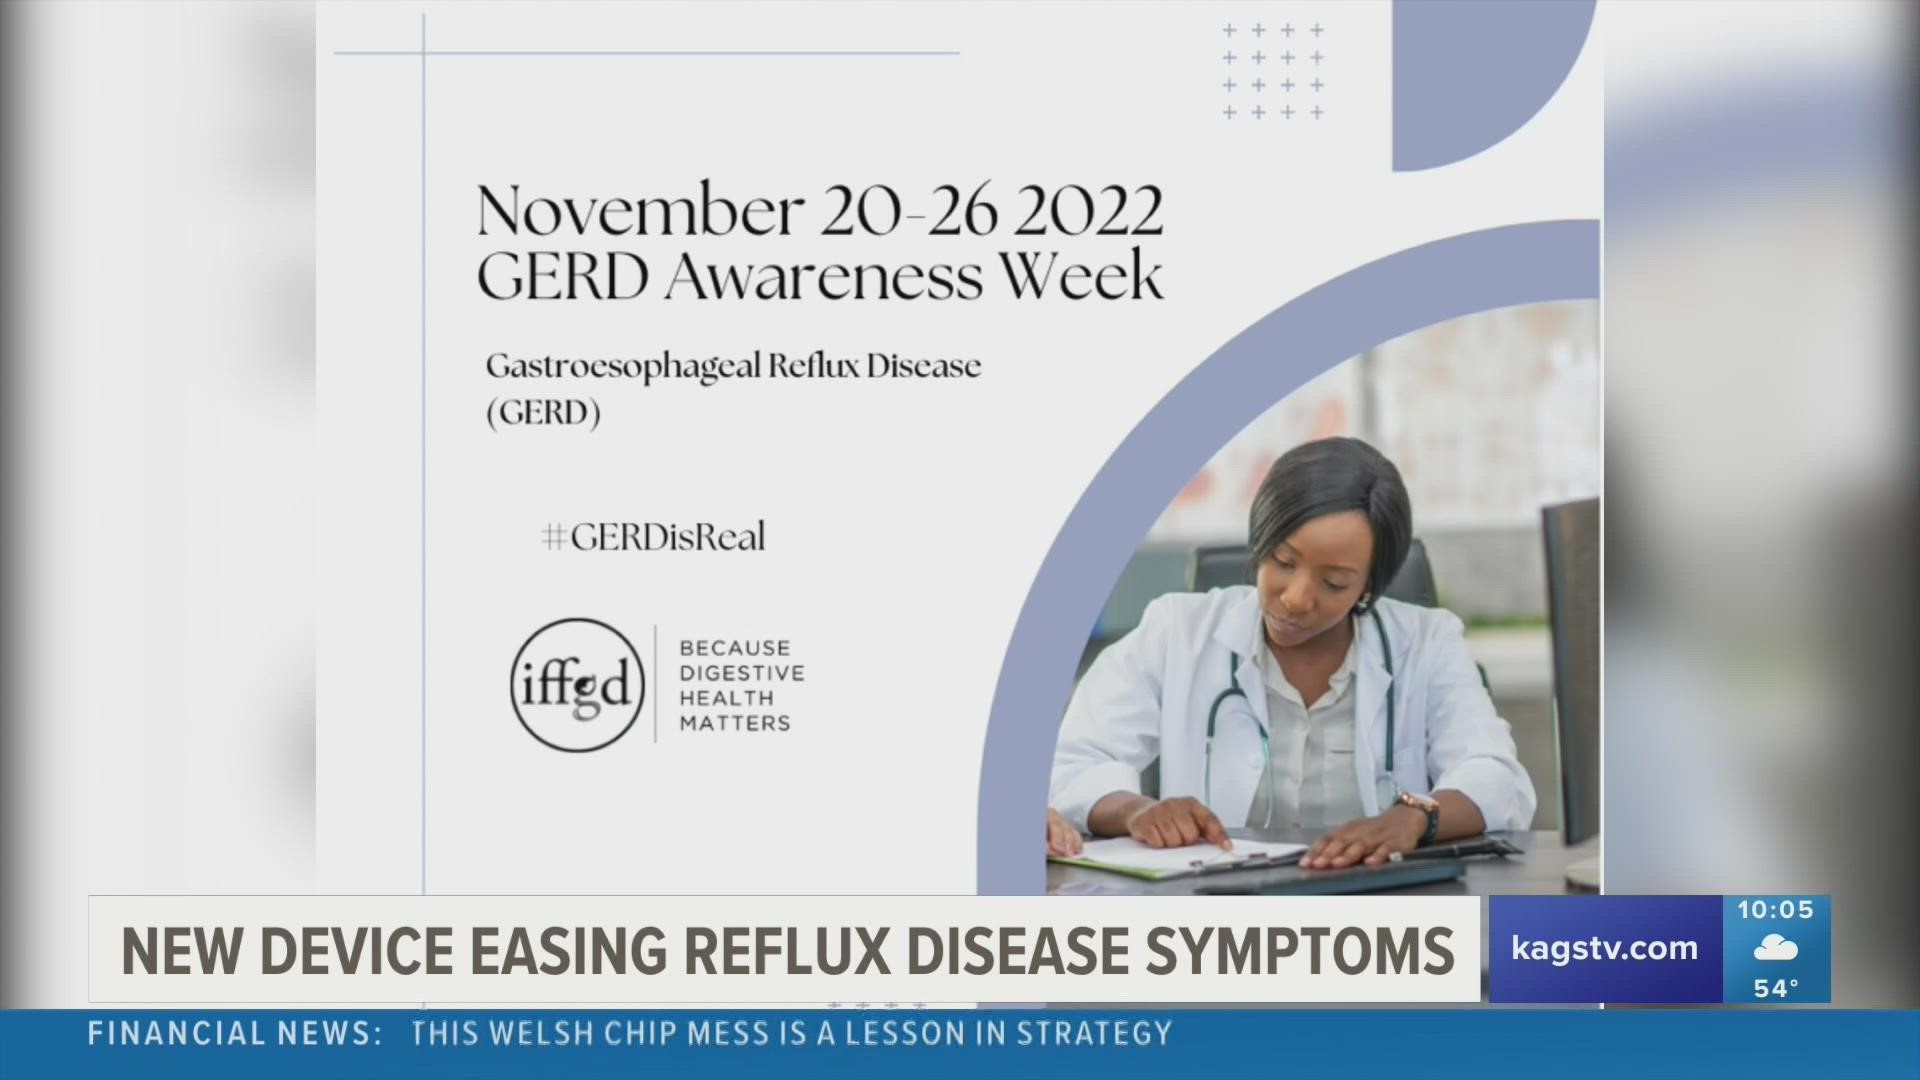 A new device called LINX is eliminating symptoms of GERD as its awareness month comes during the Thanksgiving holiday.